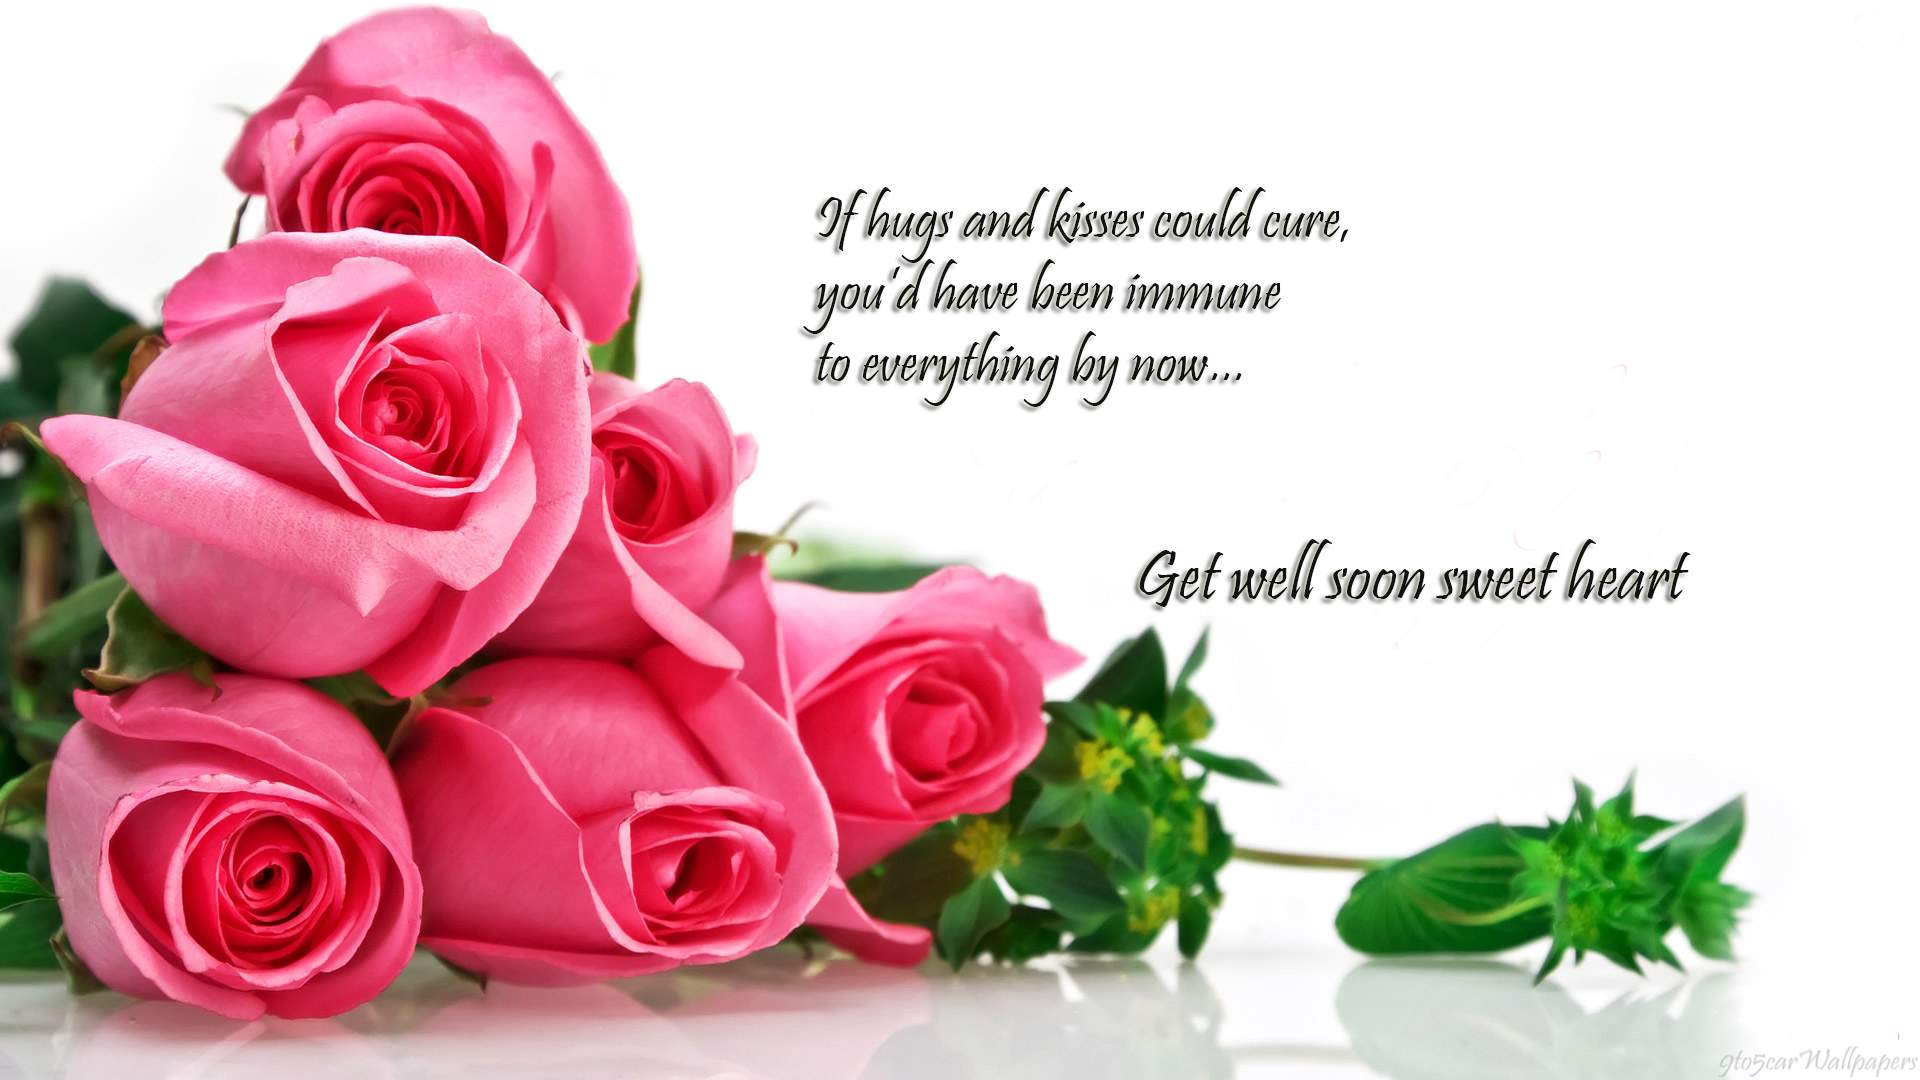 Get well Soon Pics and Cards| Latest Wallpapers - 9to5 Car Wallpapers